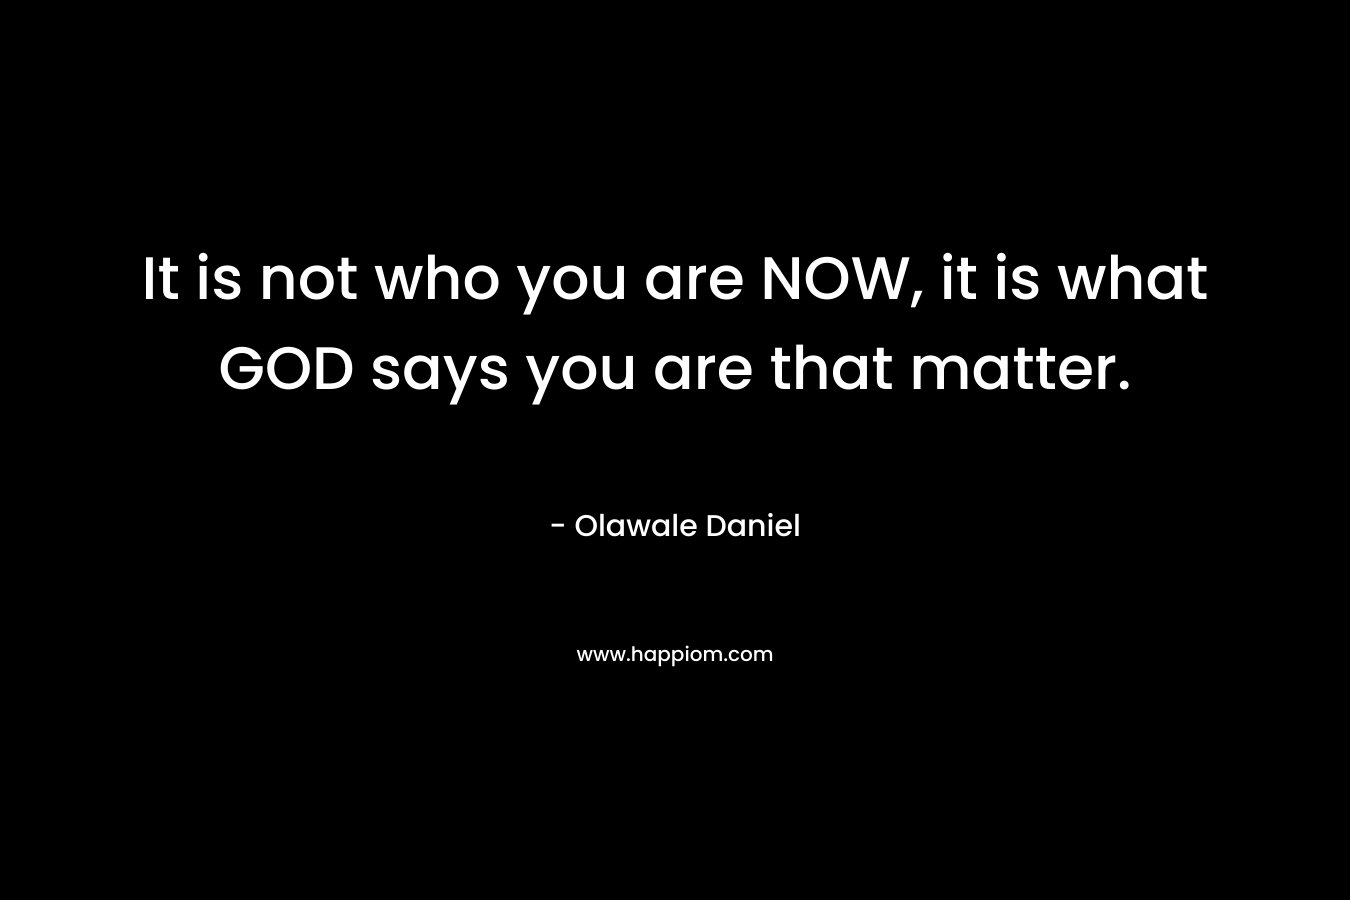 It is not who you are NOW, it is what GOD says you are that matter.